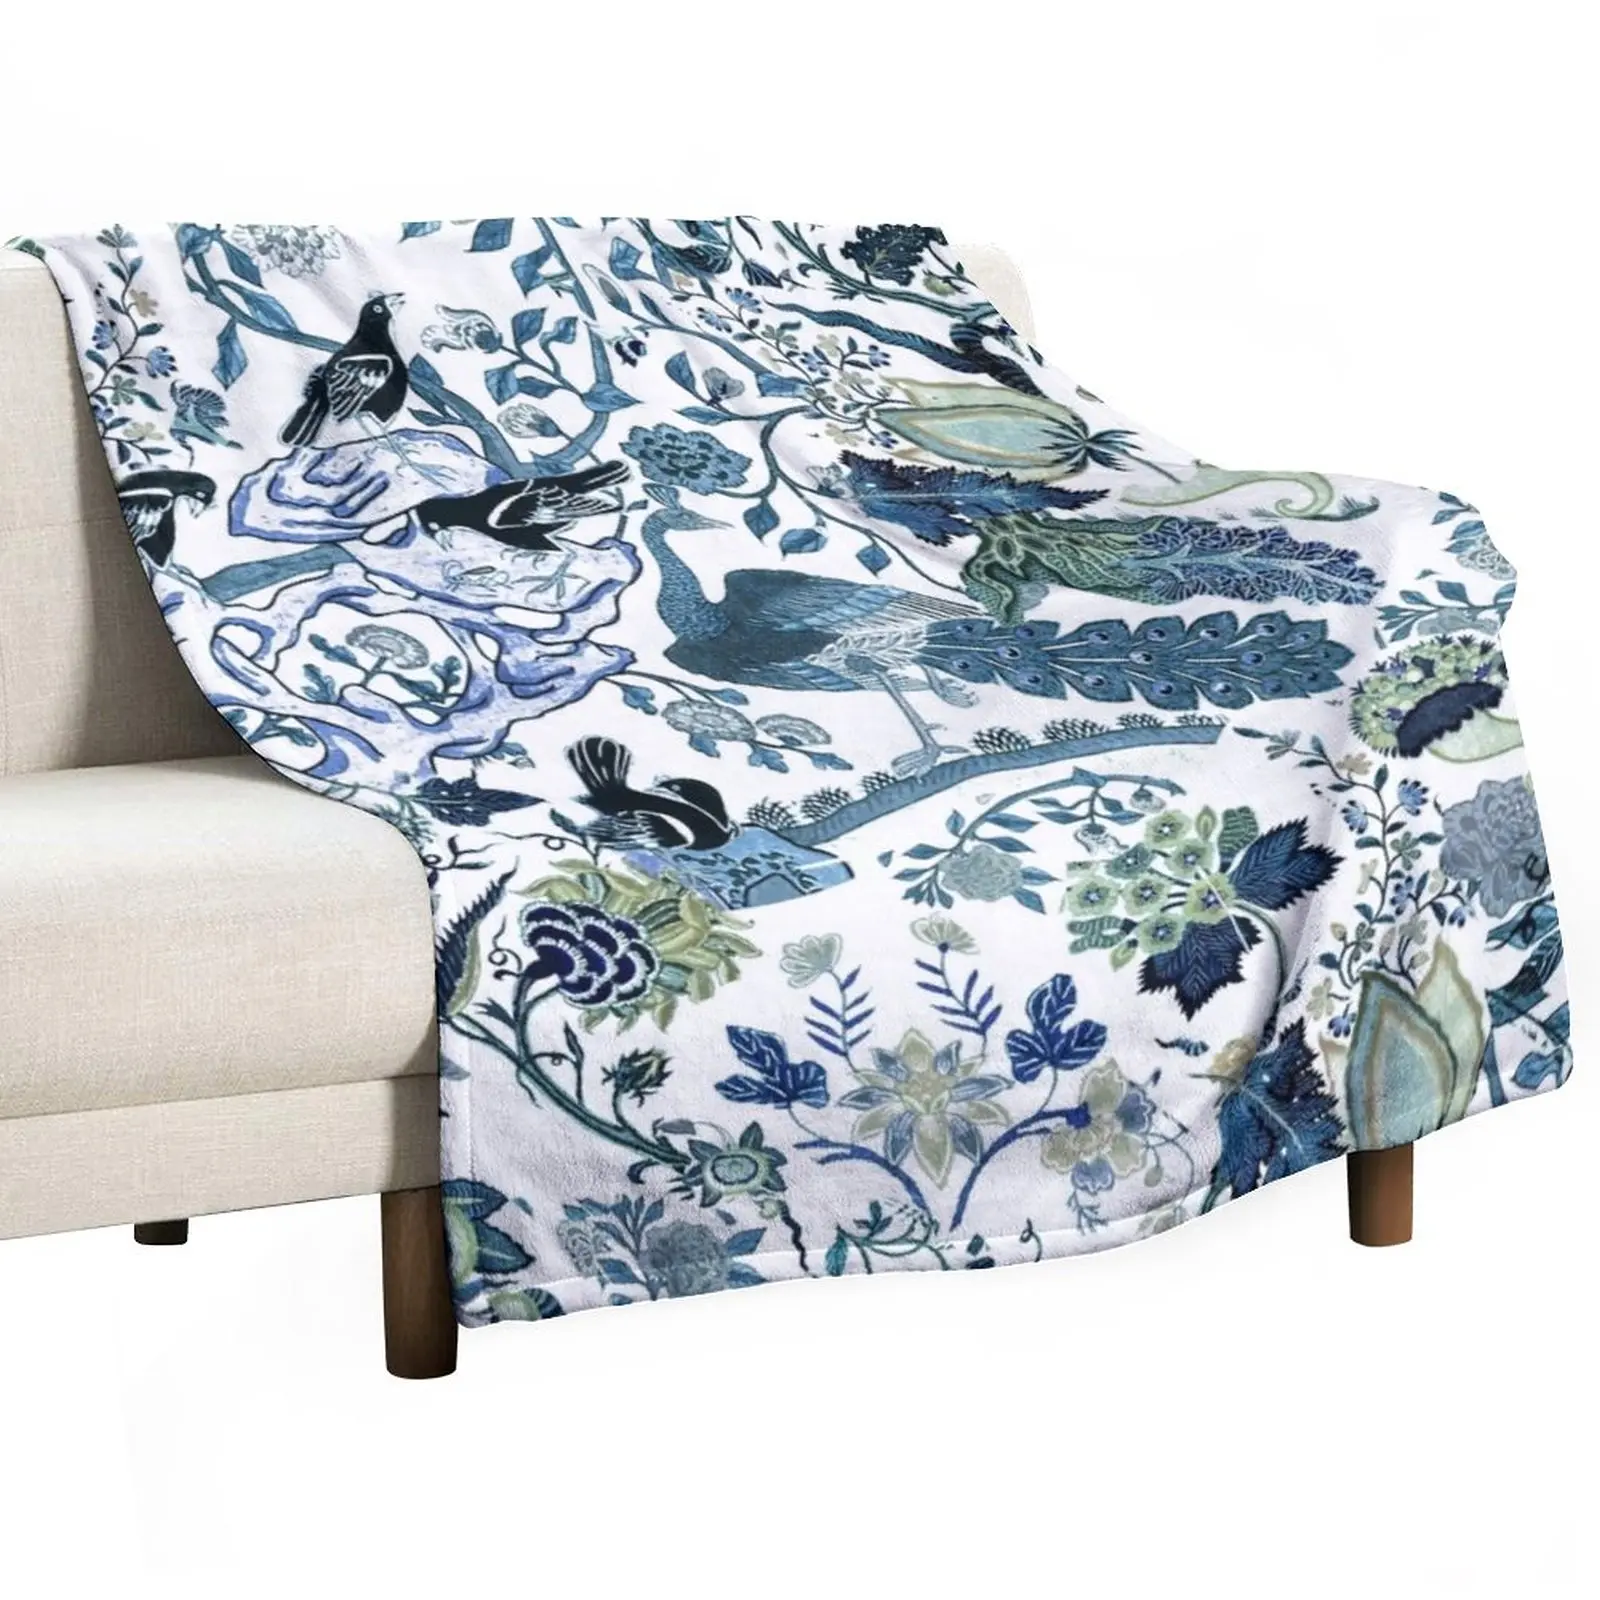 

Chinoiserie Blue, chintz, blues, greens, birds and florals Throw Blanket Blankets For Sofas sofa bed